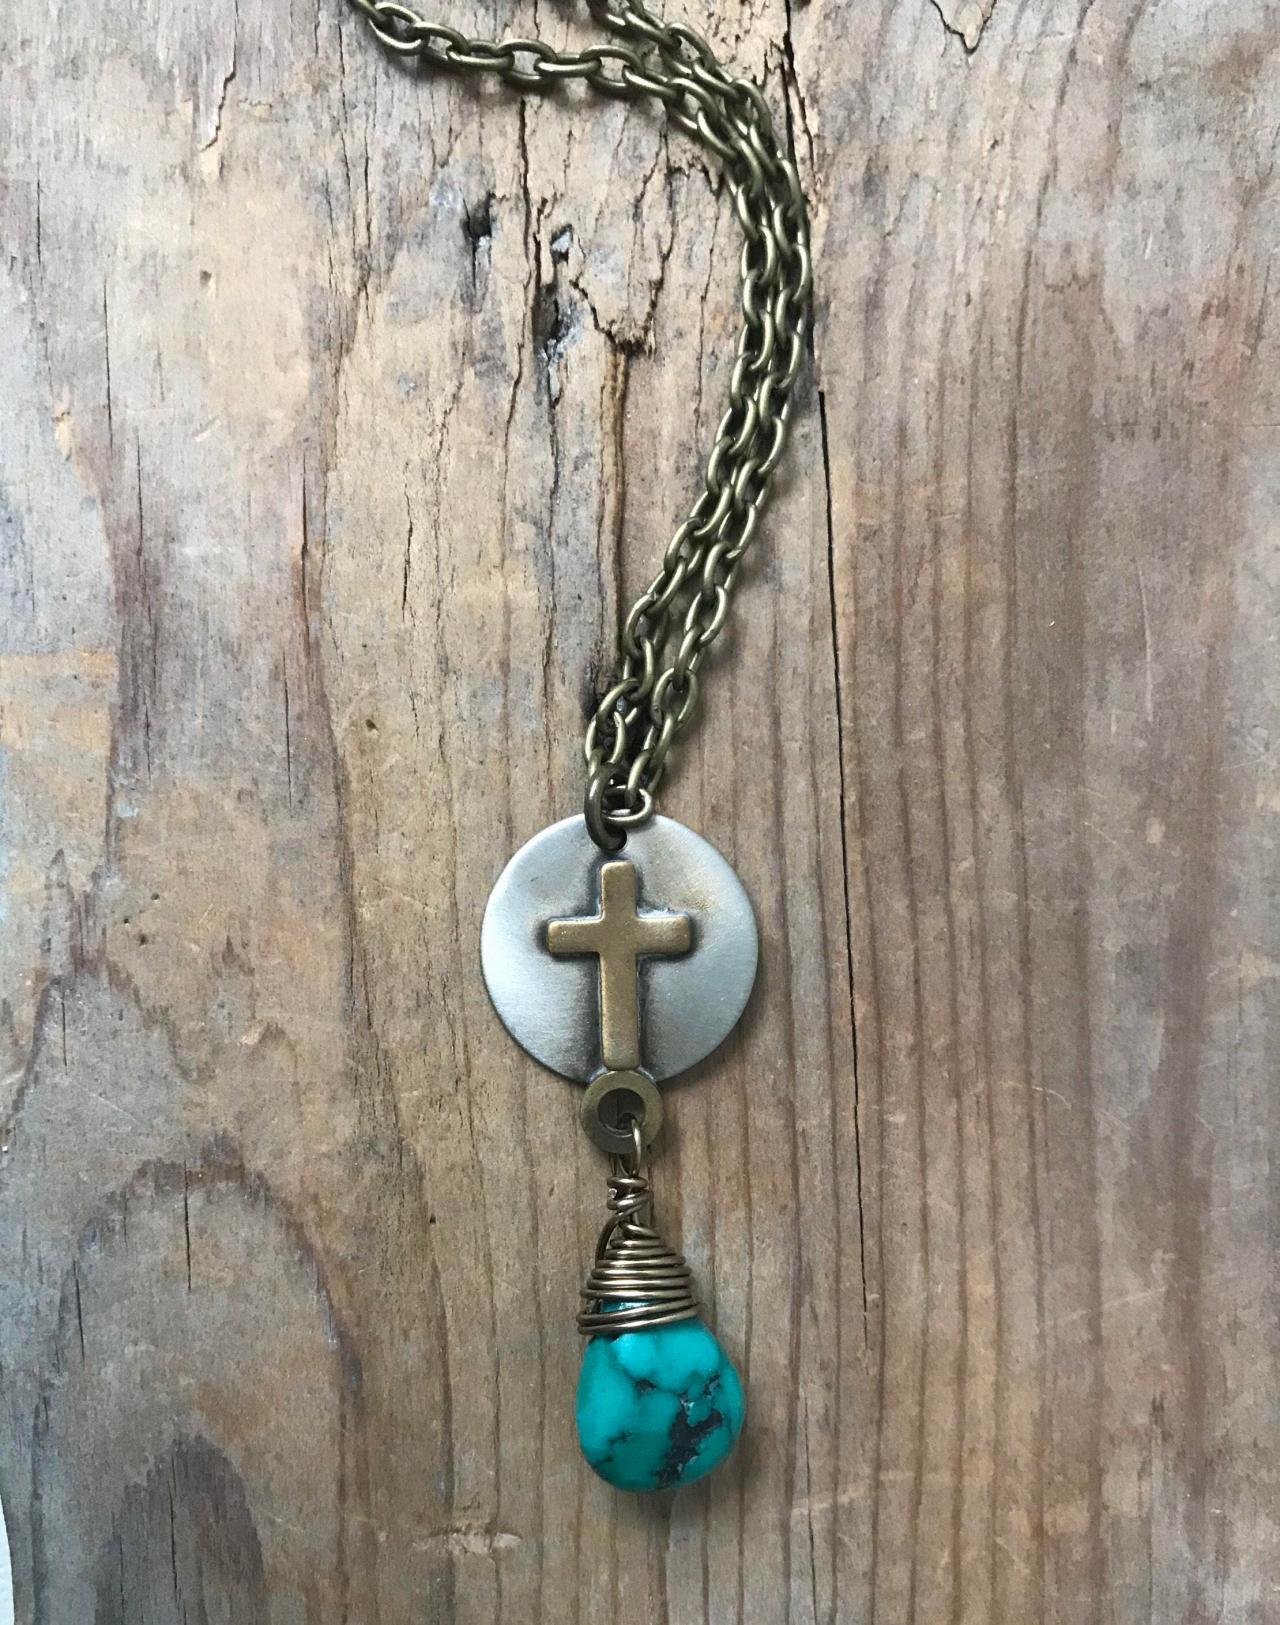 Brass Cross Necklace With Turquoise. December Birthstone Religious Jewelry Spiritual Southwestern Gemstone Charm Gifts Under 40 Ooak.